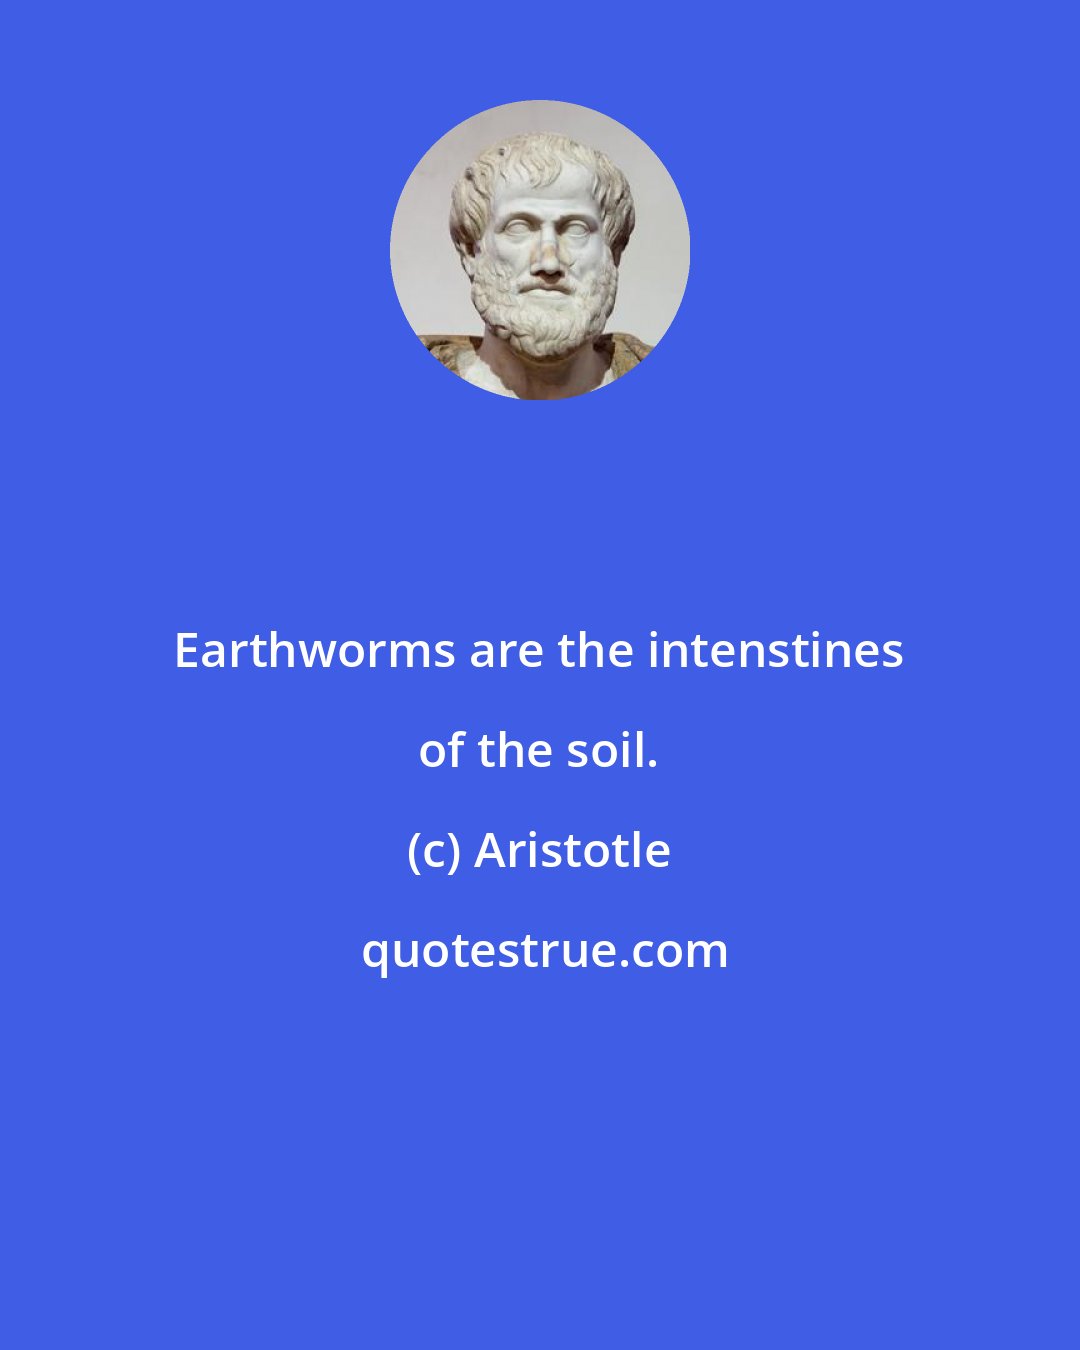 Aristotle: Earthworms are the intenstines of the soil.